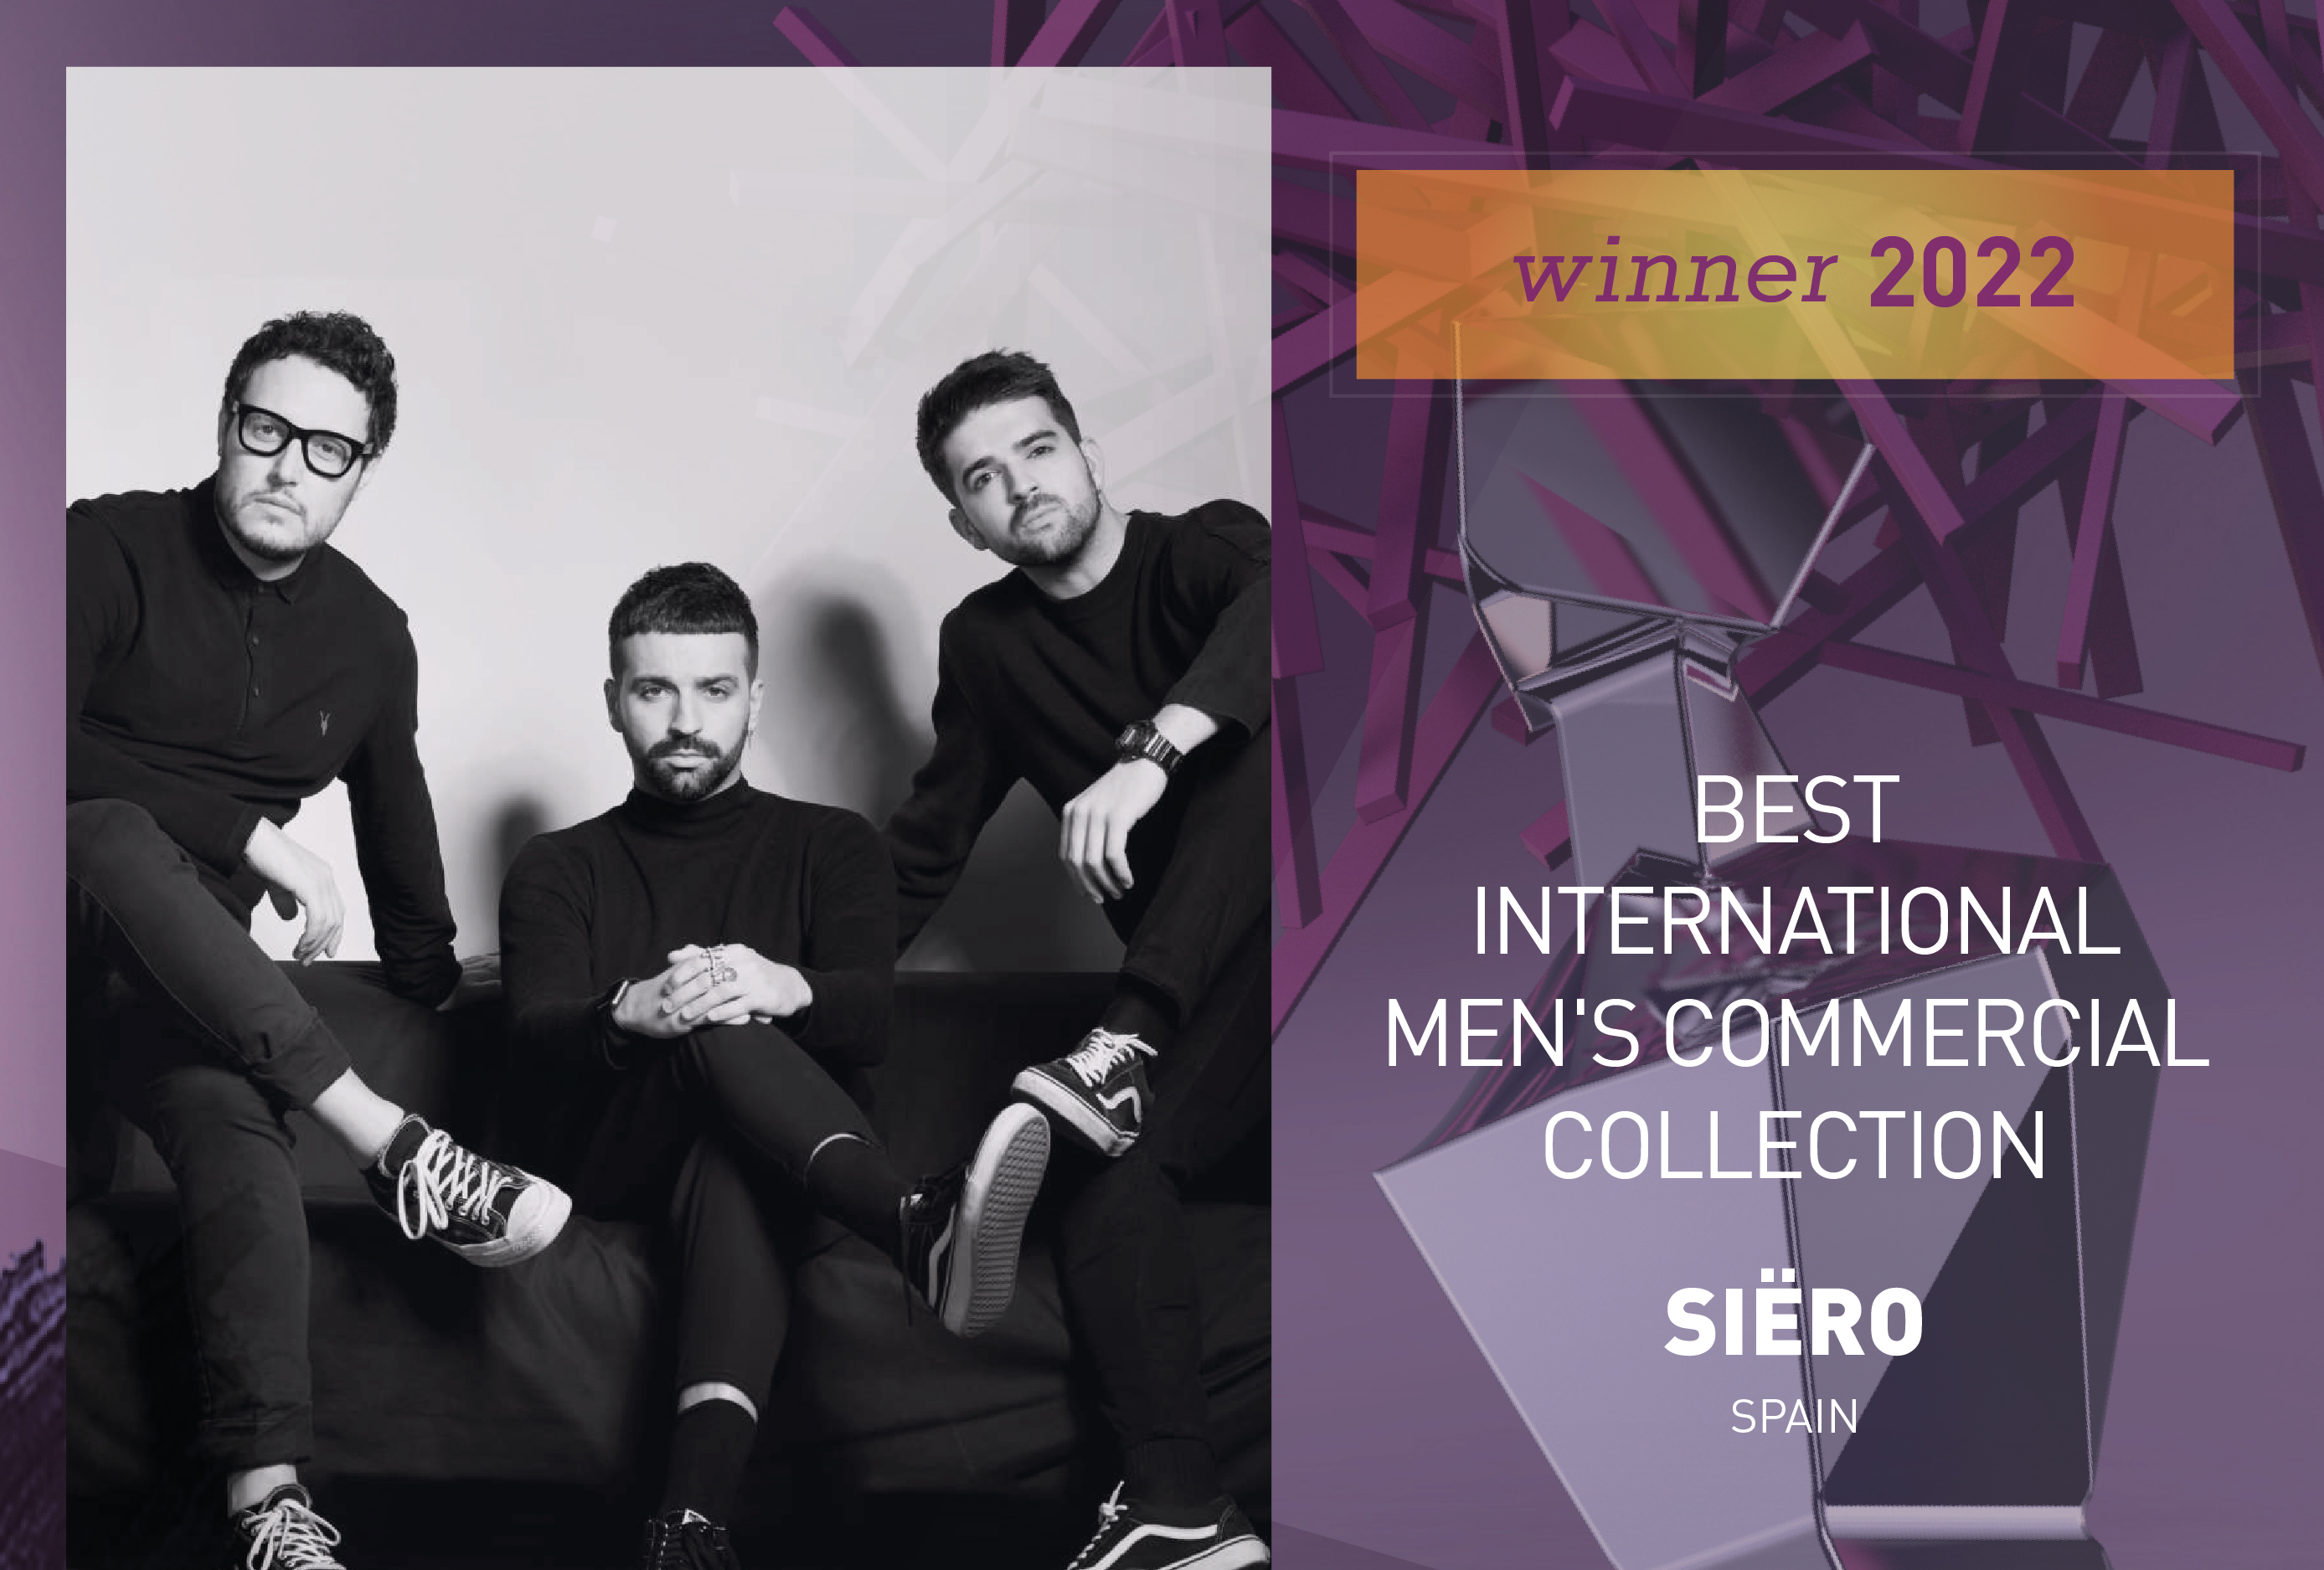 Siëro, winners of Best International Men’s Commercial Collection at the 2022 International Hairdressing Awards